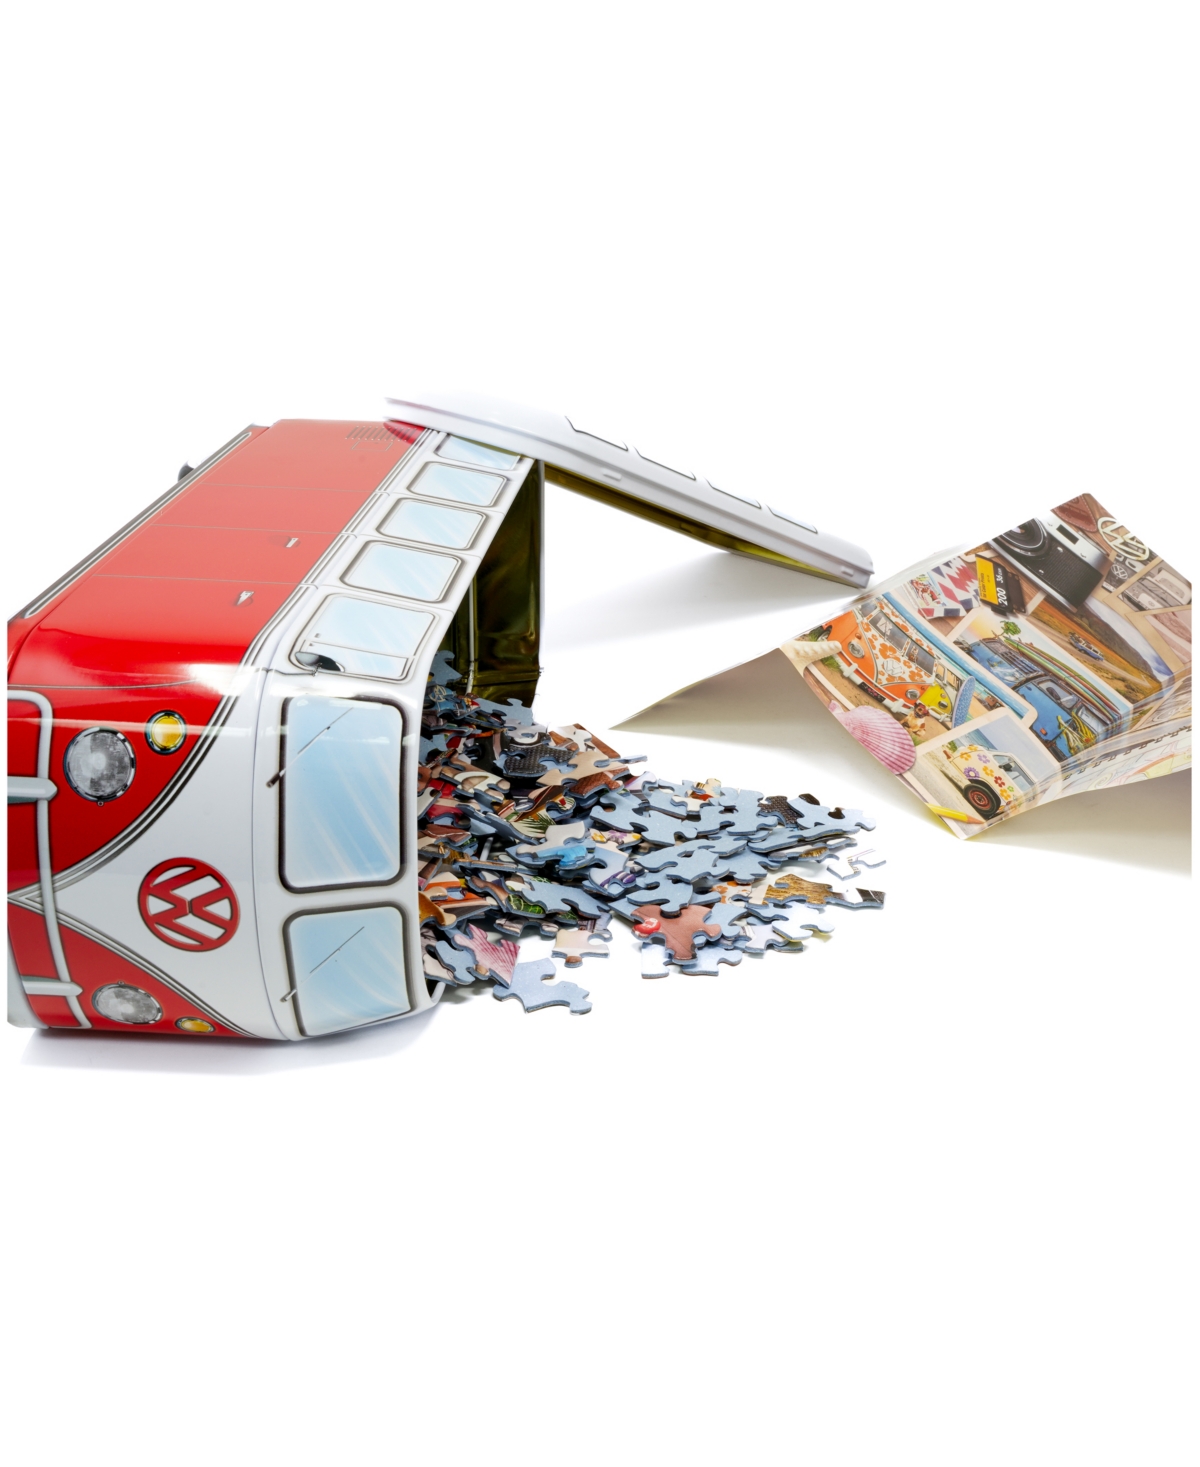 Shop University Games Eurographics Incorporated Volkswagen Road Trips Collectible Bus-shaped Tin Puzzle, 550 Pieces In No Color